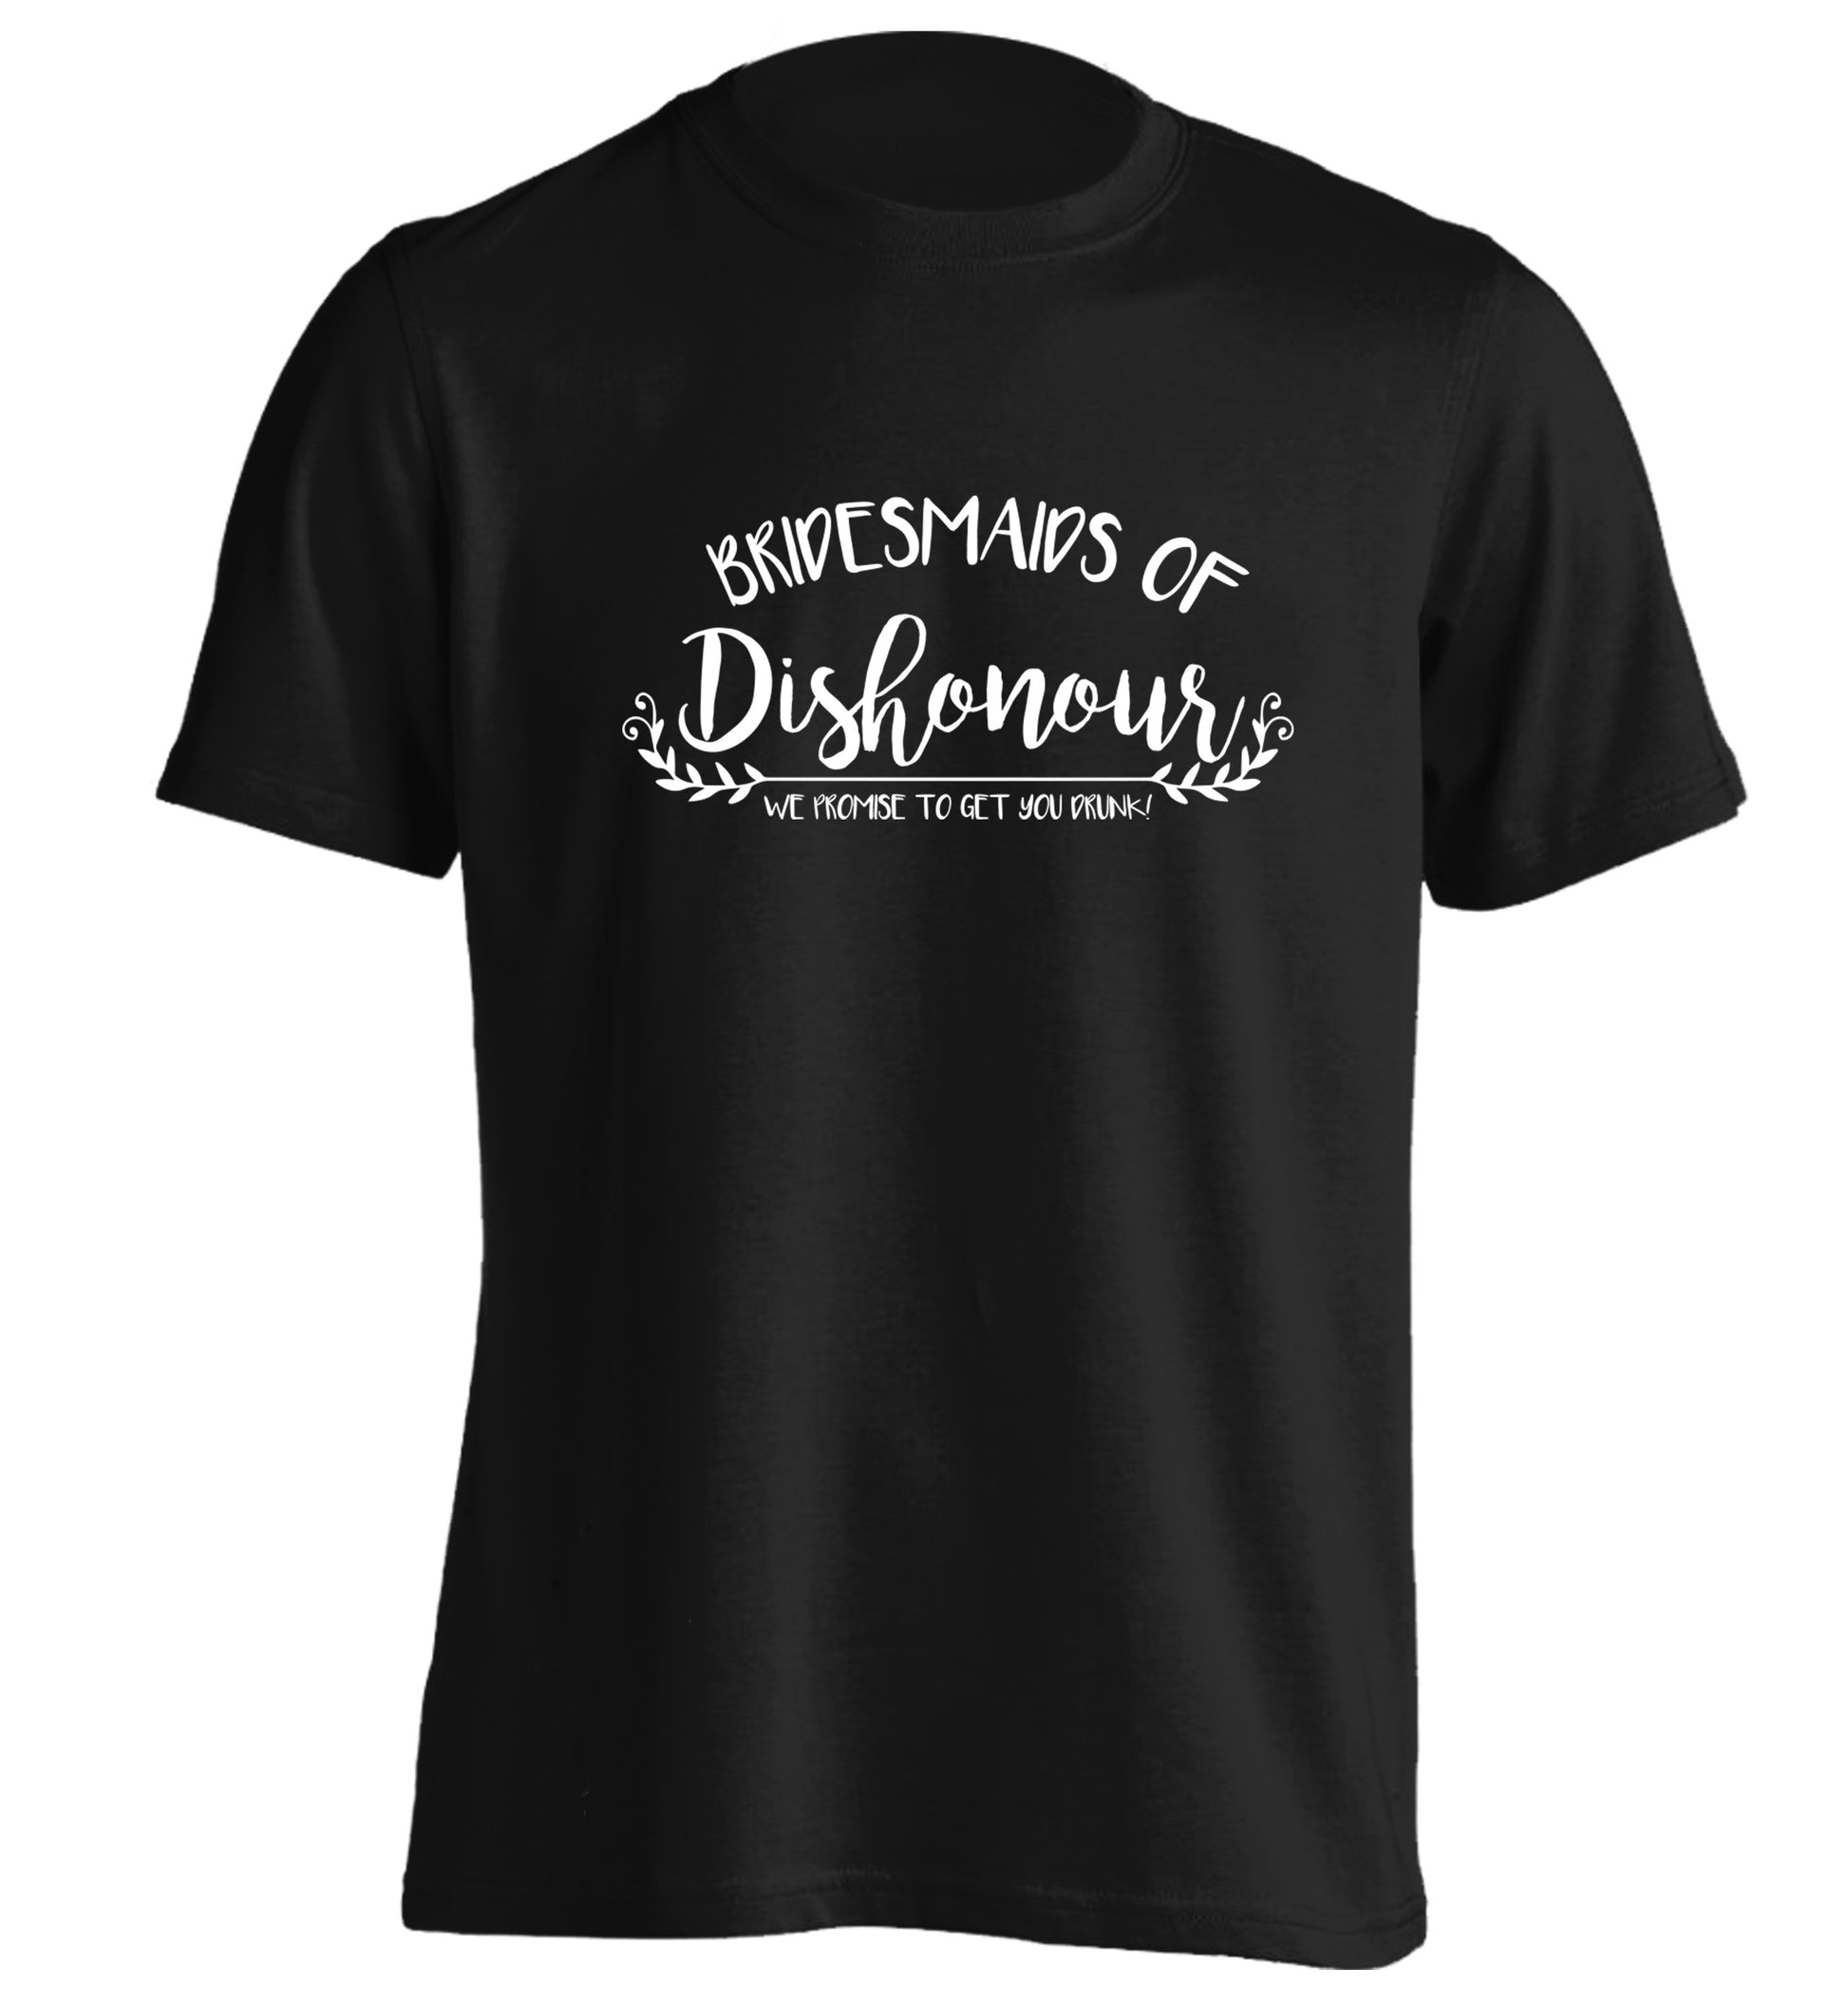 Bridesmaids of Dishonour we promise to get you drunk! adults unisex black Tshirt 2XL